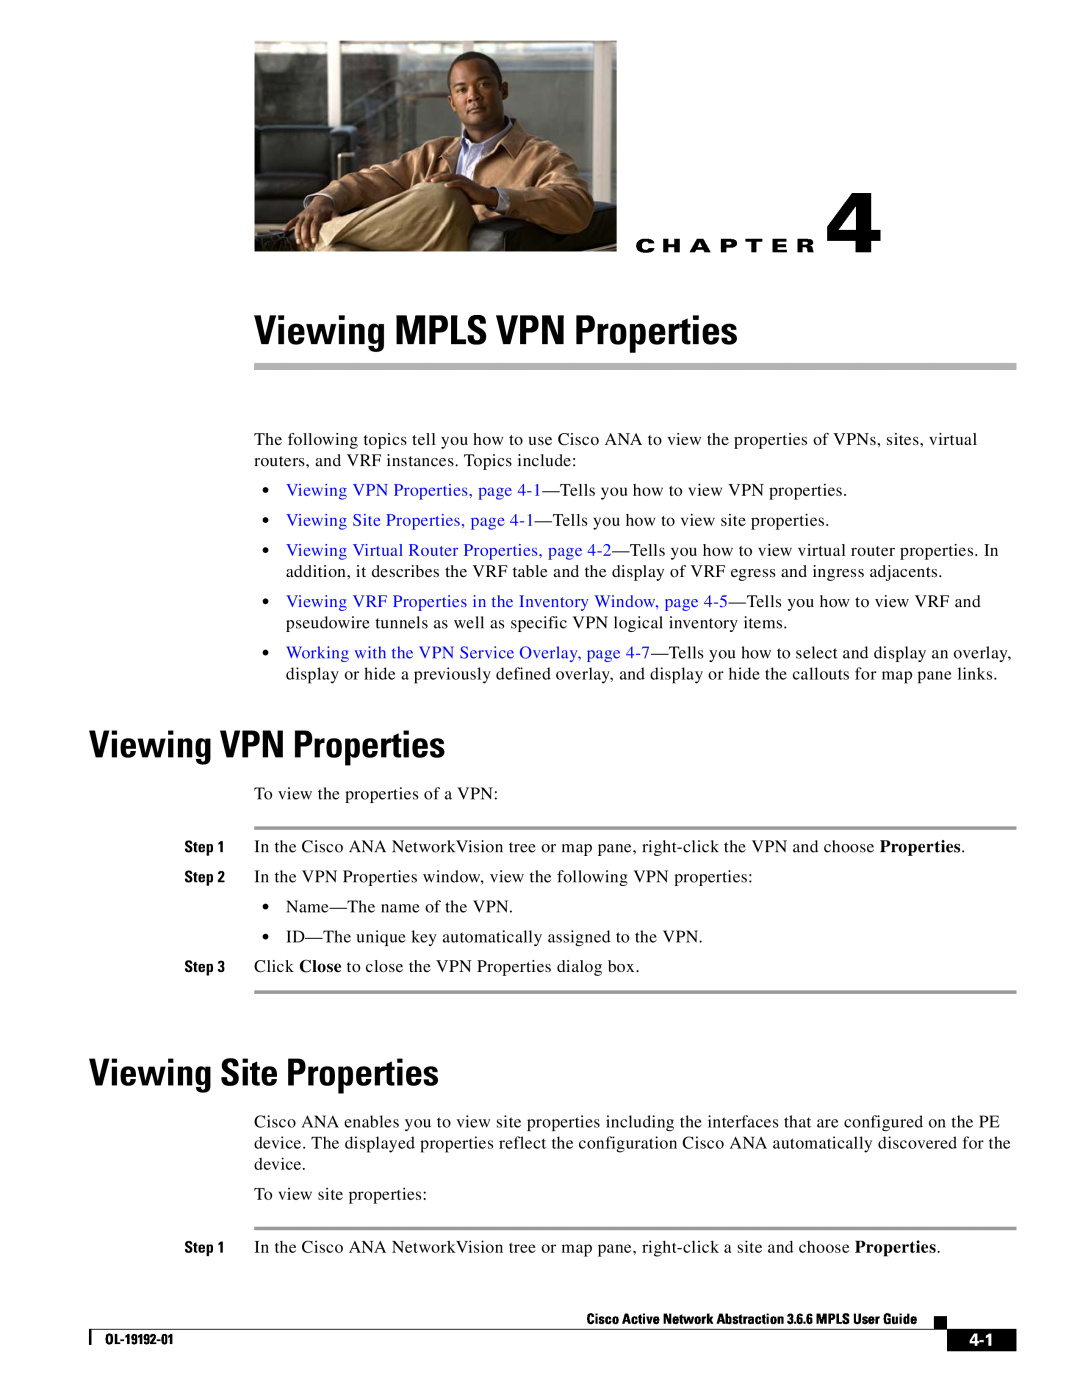 Cisco Systems 3.6.6 manual Viewing MPLS VPN Properties, Viewing VPN Properties, Viewing Site Properties, C H A P T E R 